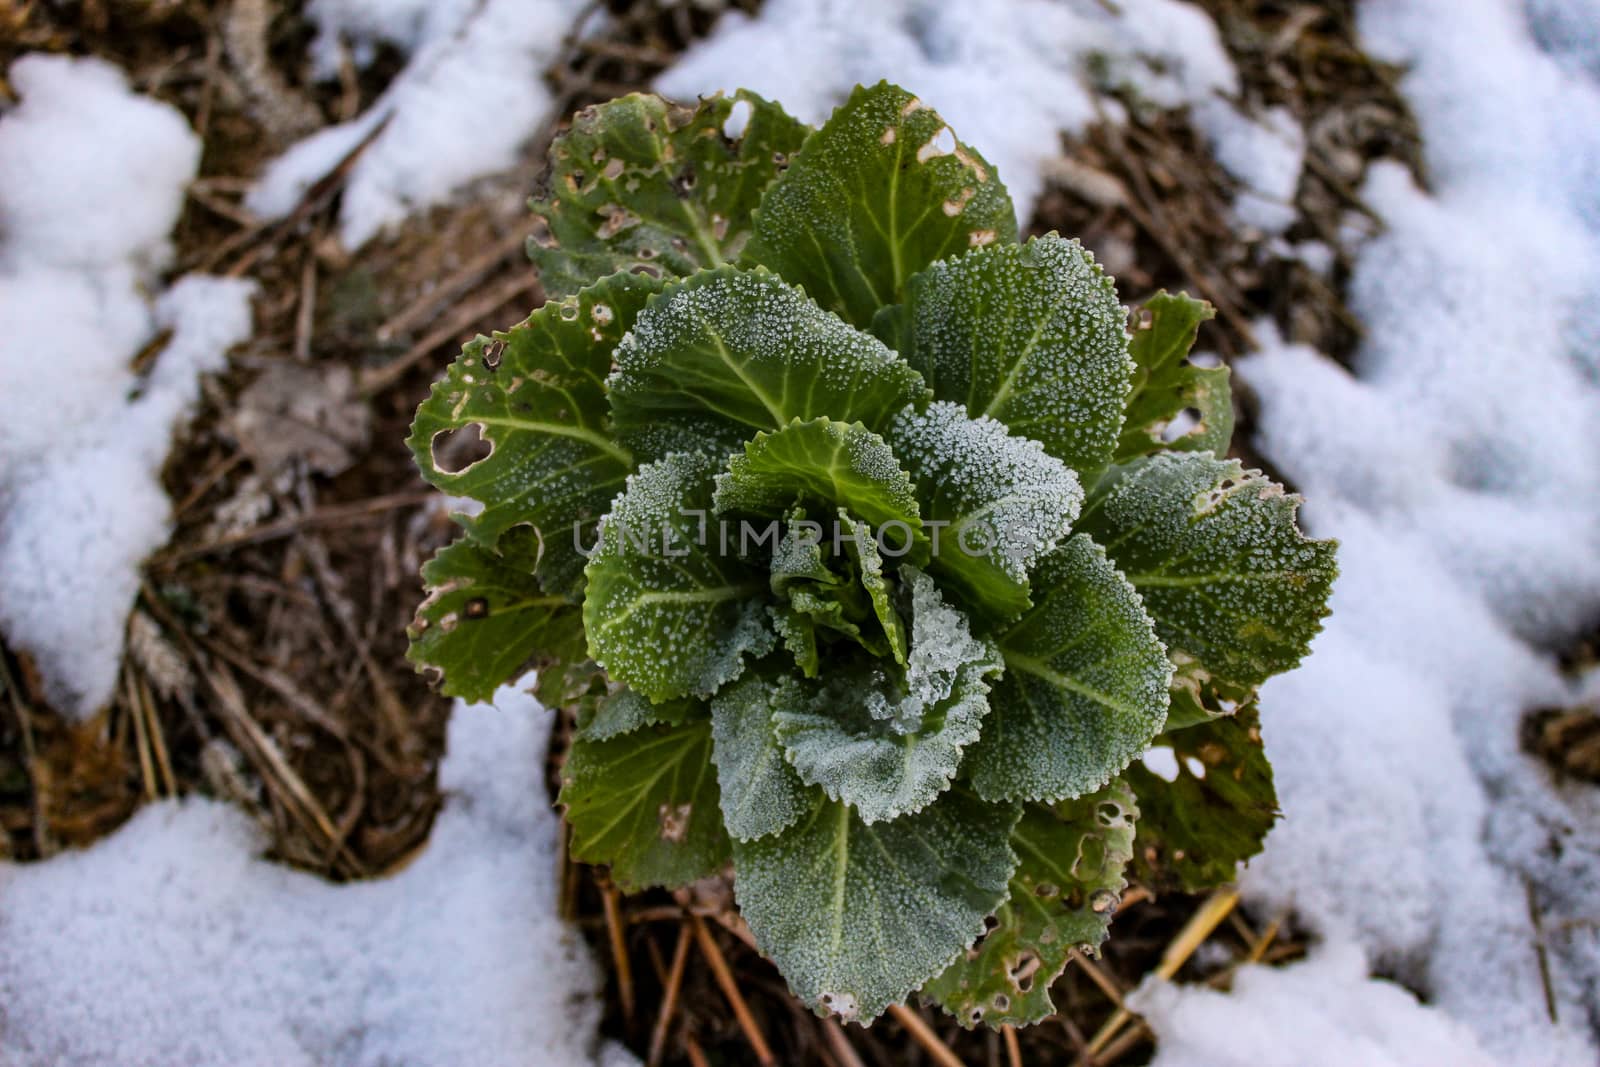 Frost on the cabbage plant. Snow around the cabbage. Winter. Zavidovici, Bosnia and Herzegovina.